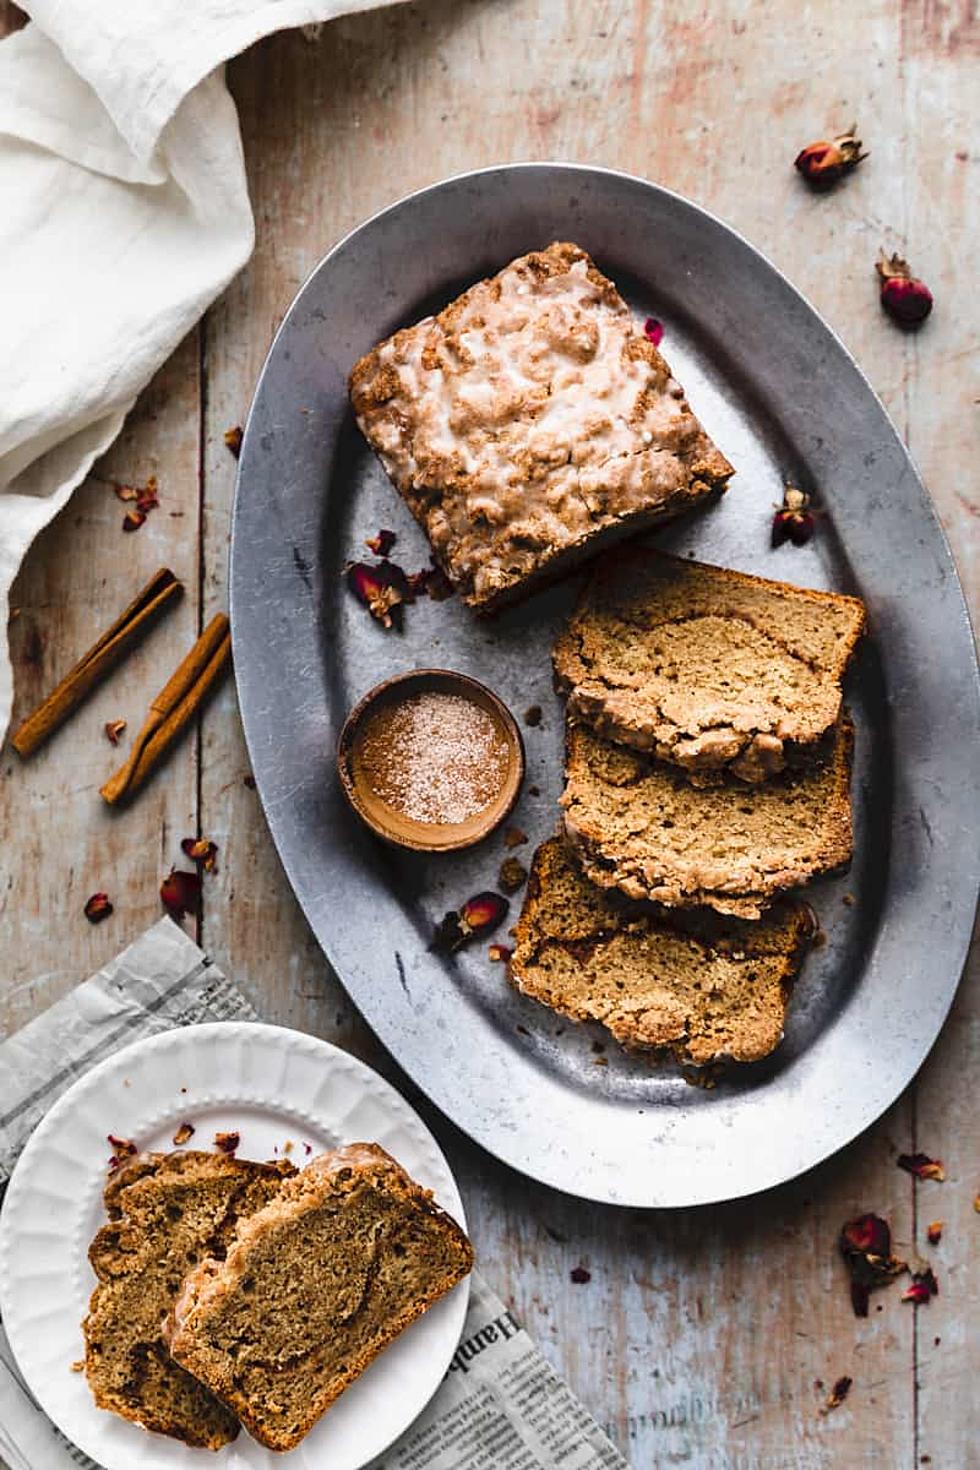 The Best Gluten-Free and Dairy-Free Coffee Cake Banana Bread